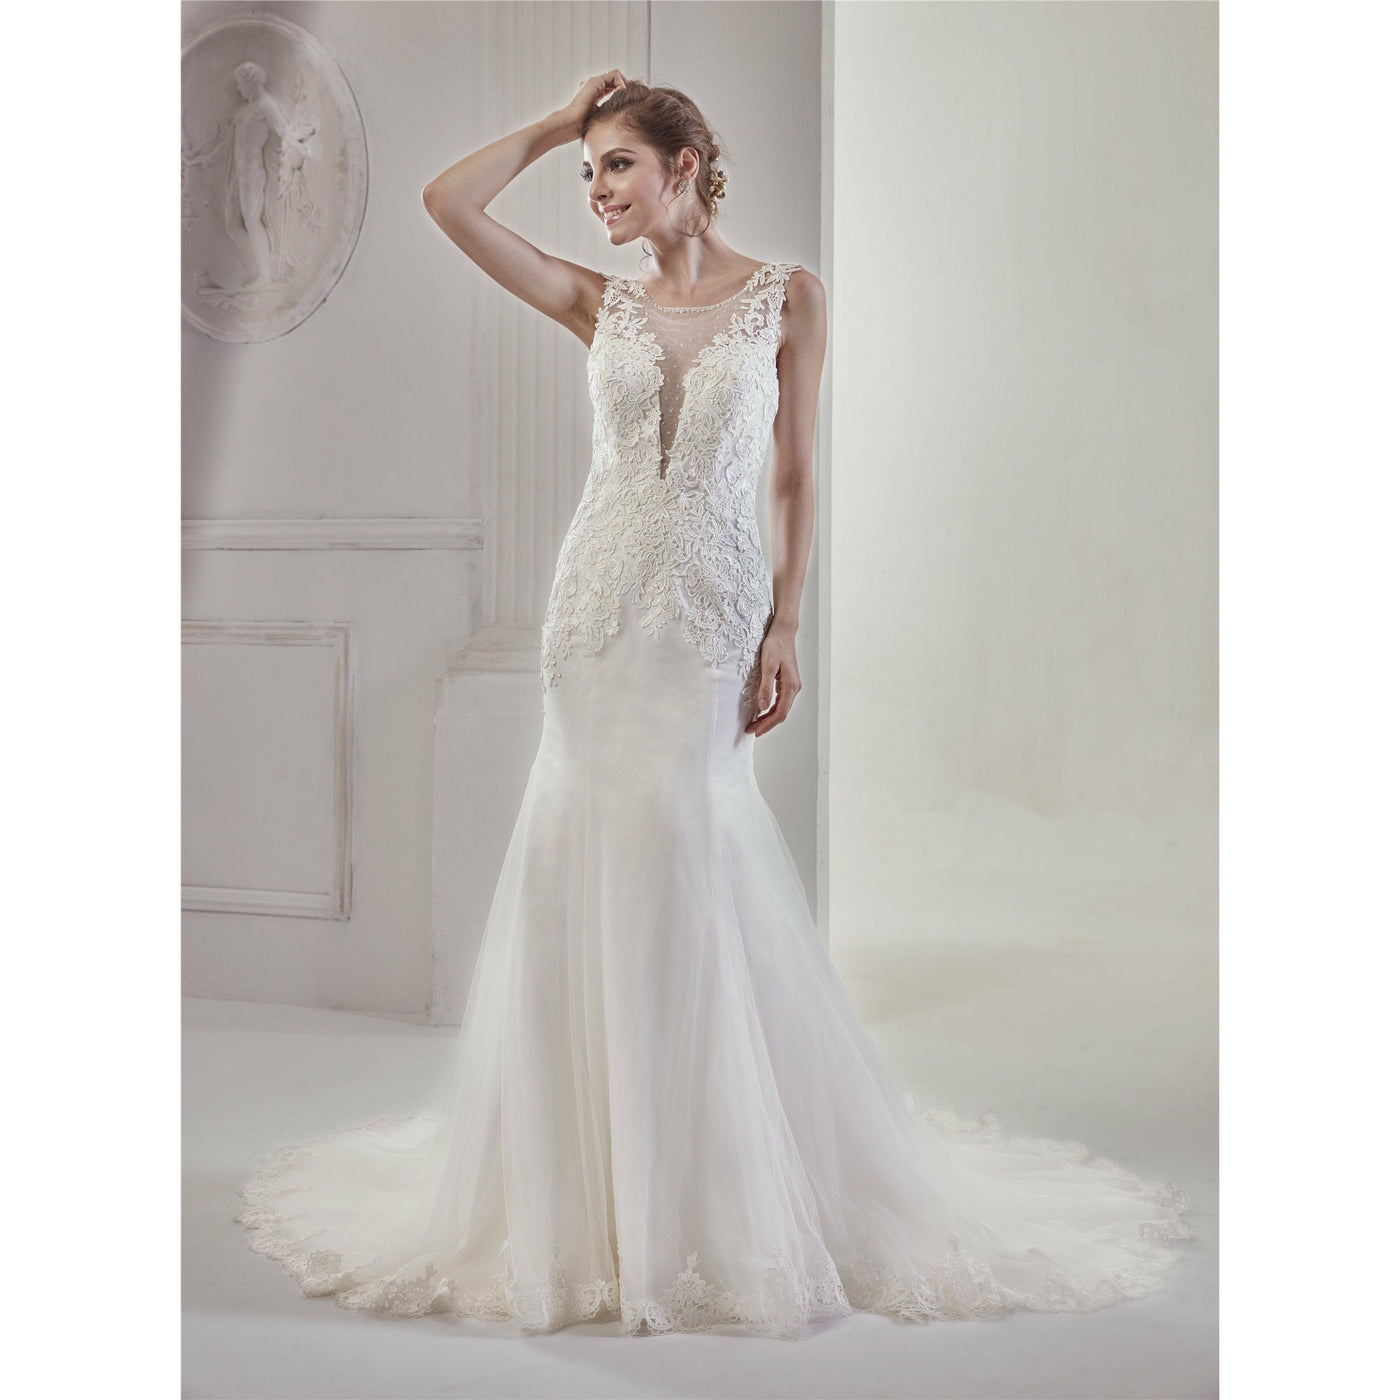 Chicely Plunging V Lace applique Mermaid wedding dress